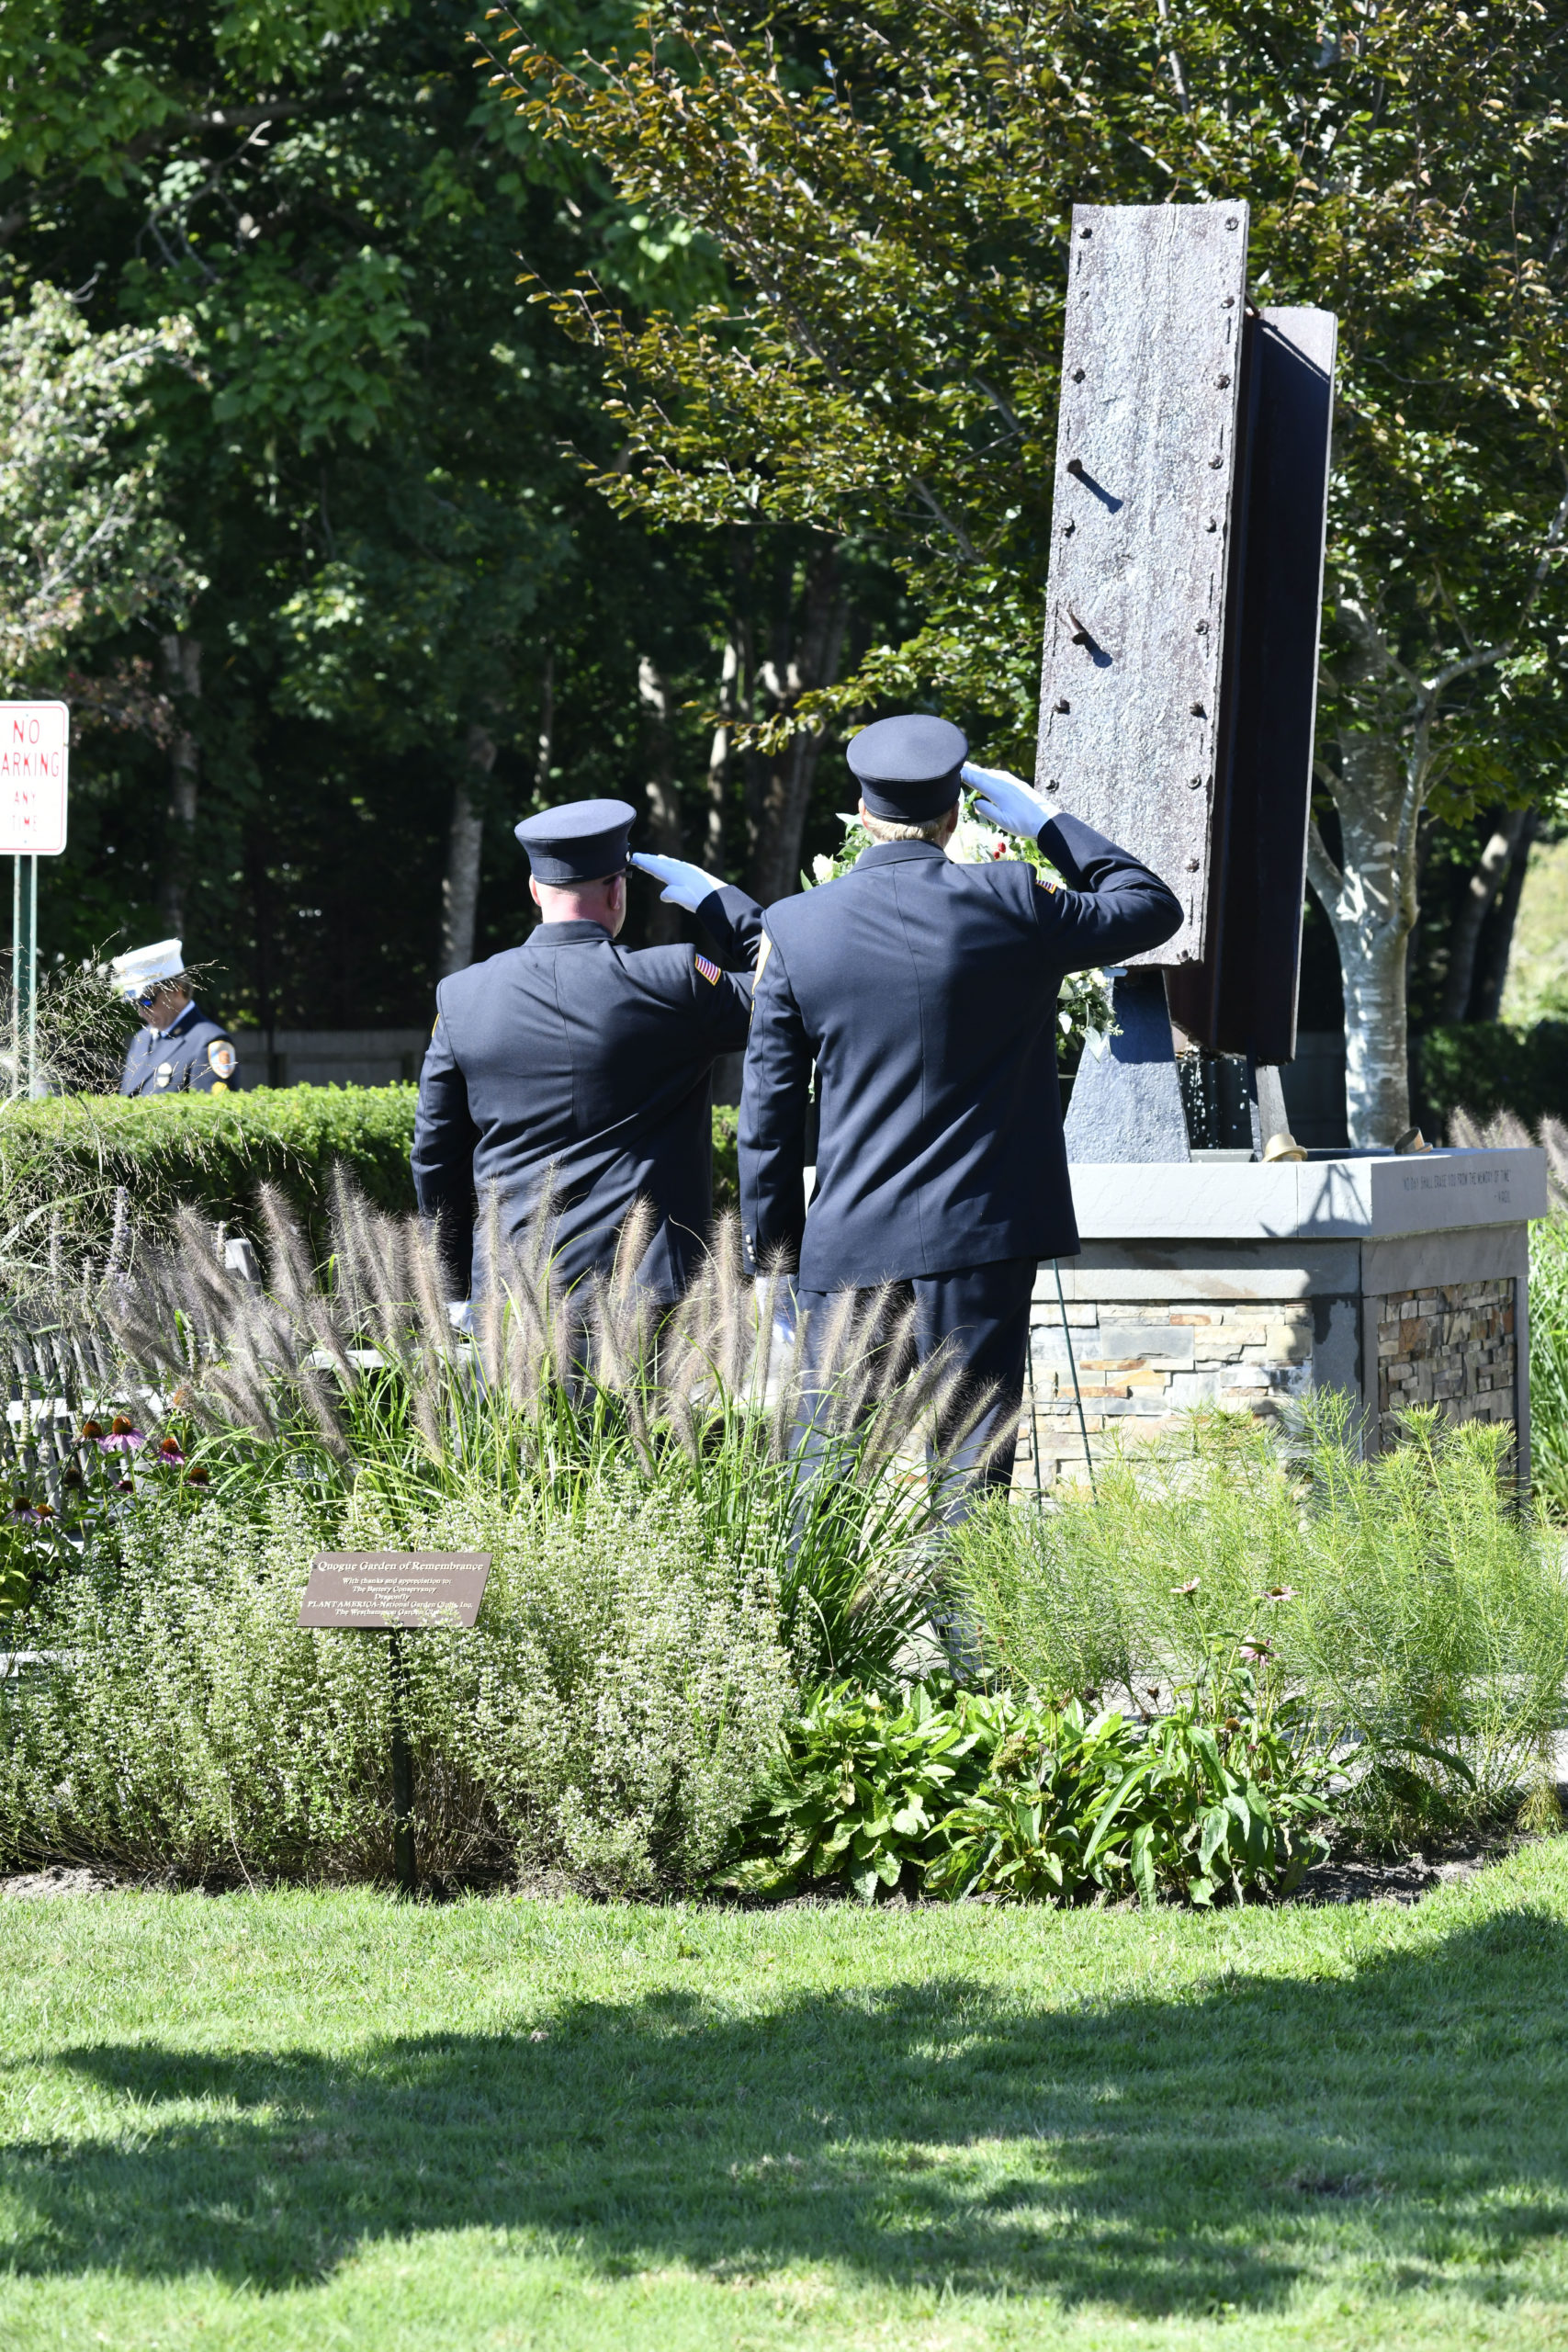 Quogue Firefighters salute the memorial on Saturday.